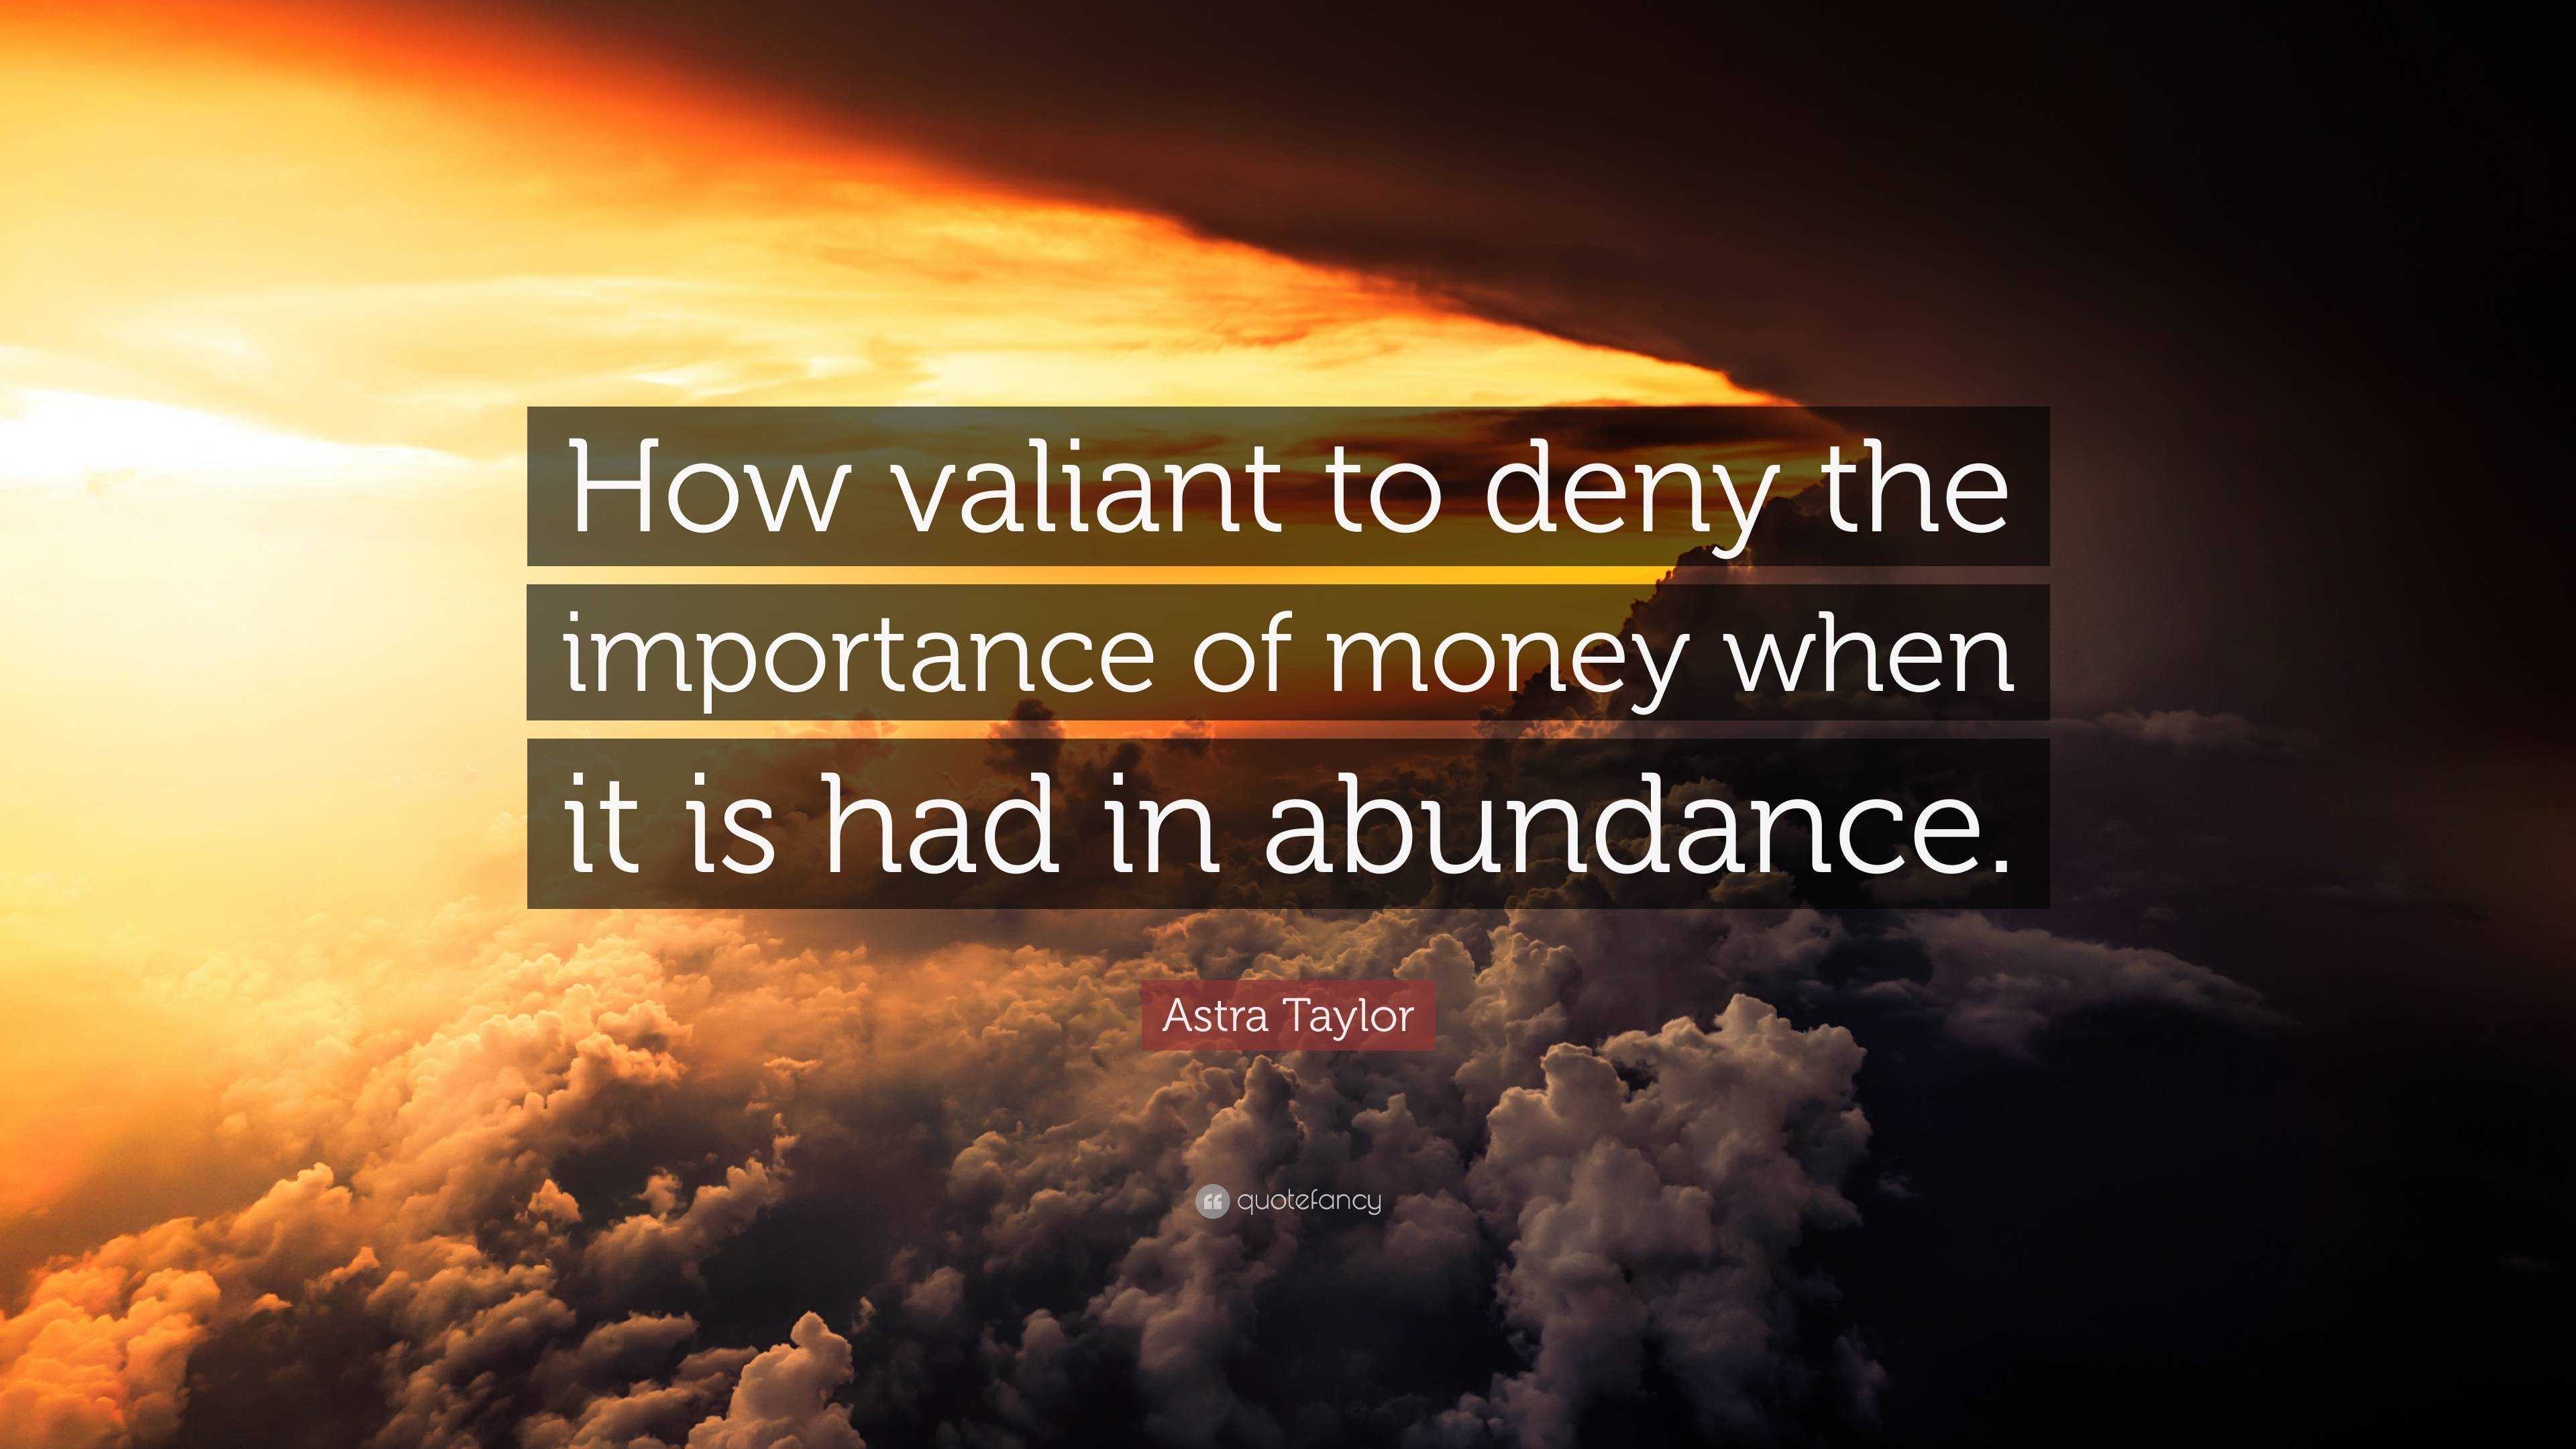 Astra Taylor Quote: “How valiant to deny the importance of money when it is  had in